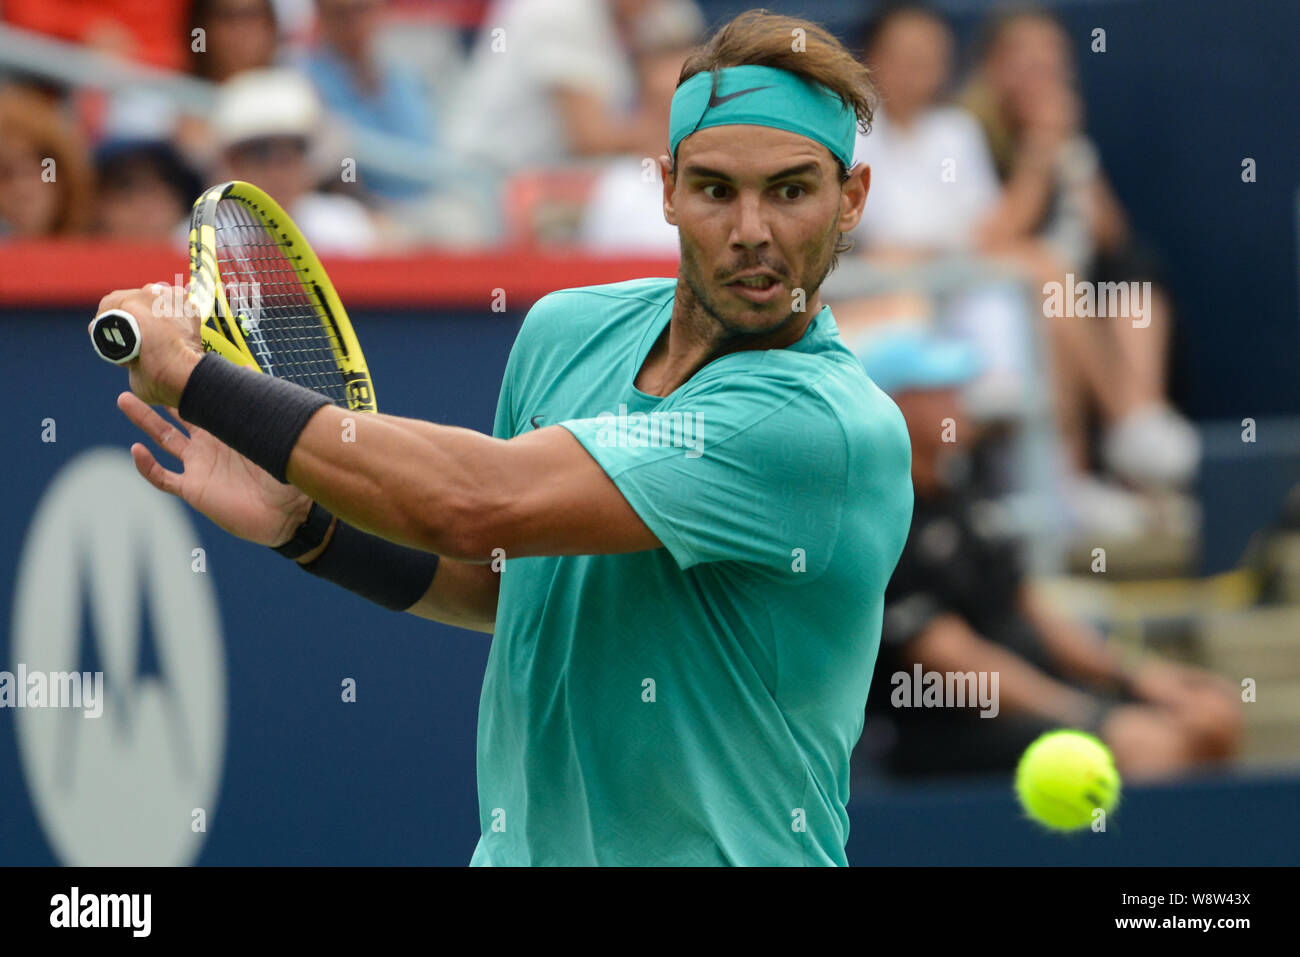 Montreal, Quebec, Canada. 11th Aug, 2019. RAFAEL NADAL of Spain playing in  the final of the Rogers Cup tennis tournament in Montreal Canada. Credit:  Christopher Levy/ZUMA Wire/Alamy Live News Stock Photo -